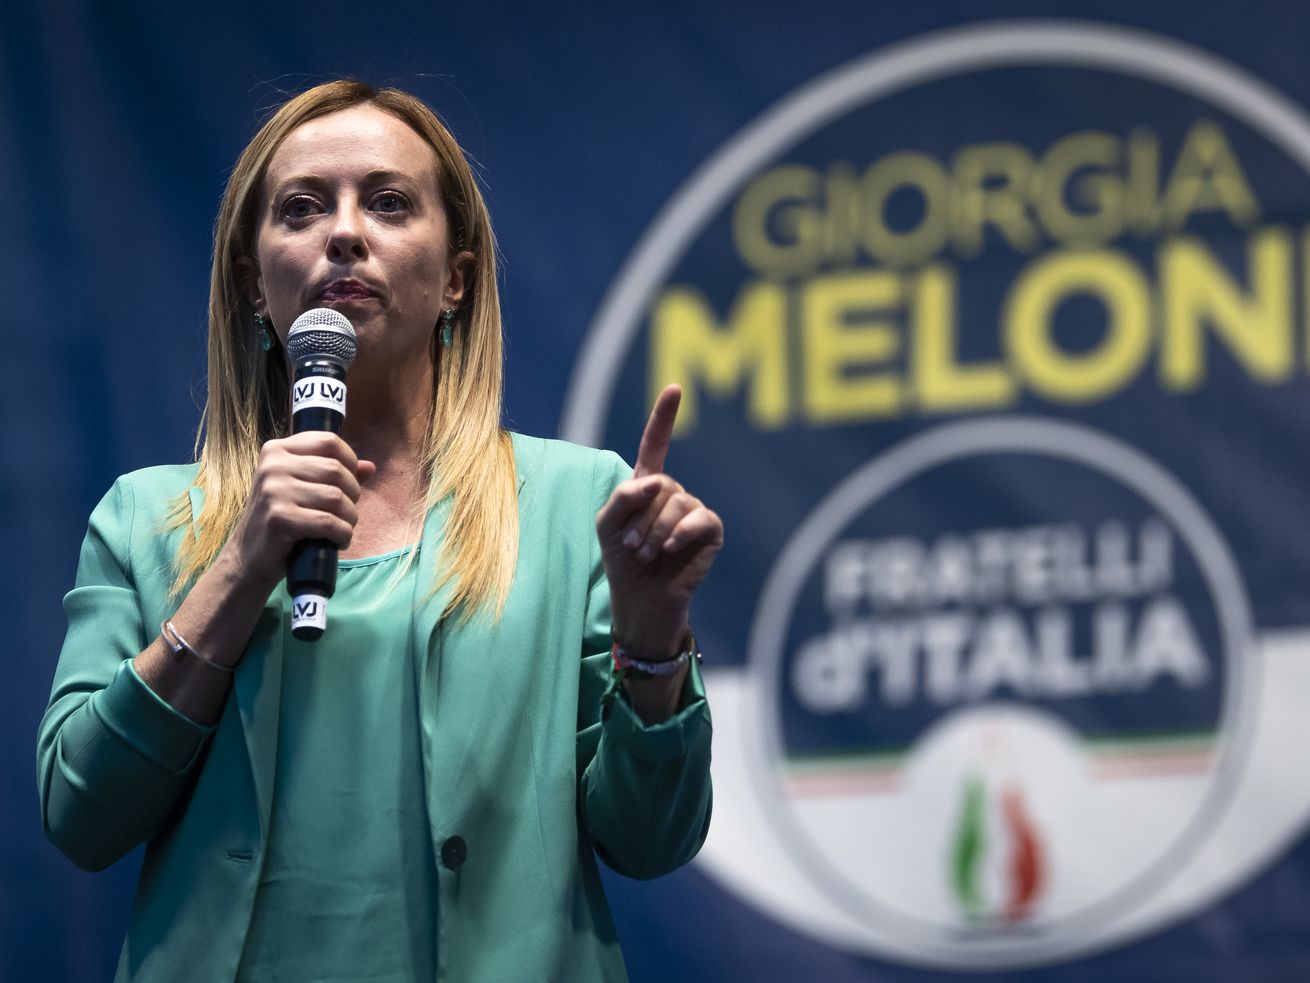 The rise of Giorgia Meloni, Italy’s new far-right prime minister, explained